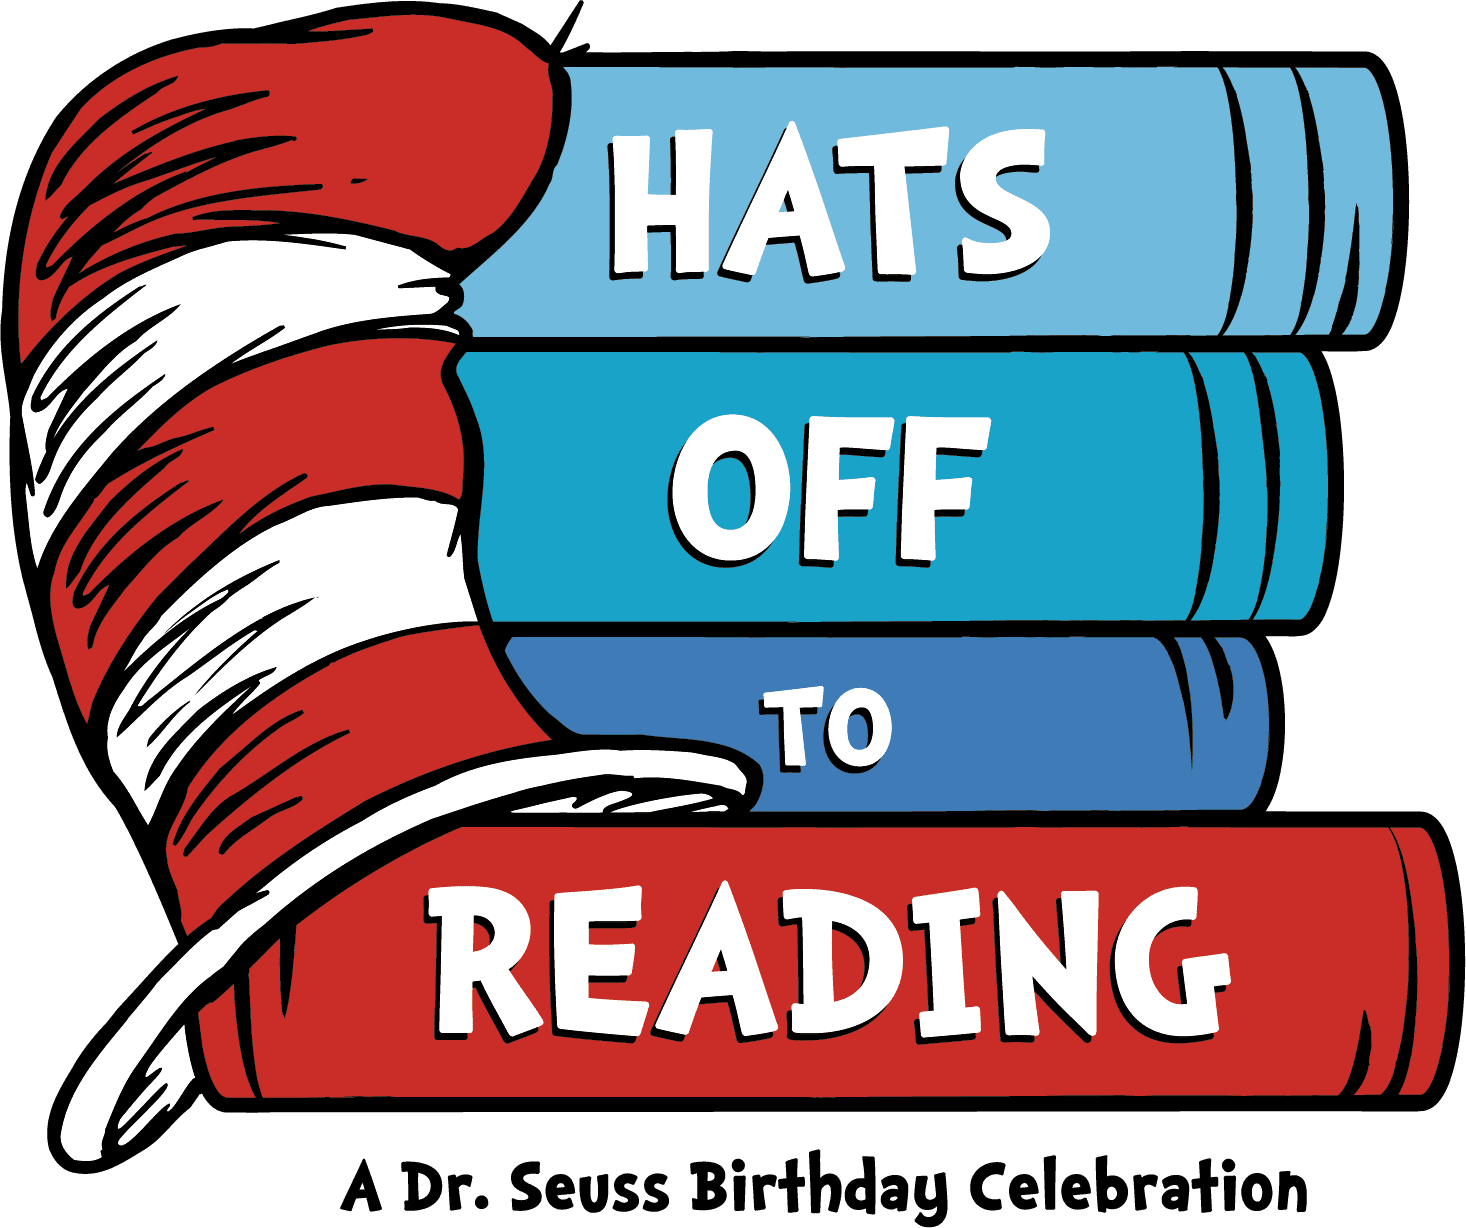 Hats Off to Reading A Dr. Seuss Birthday Celebration